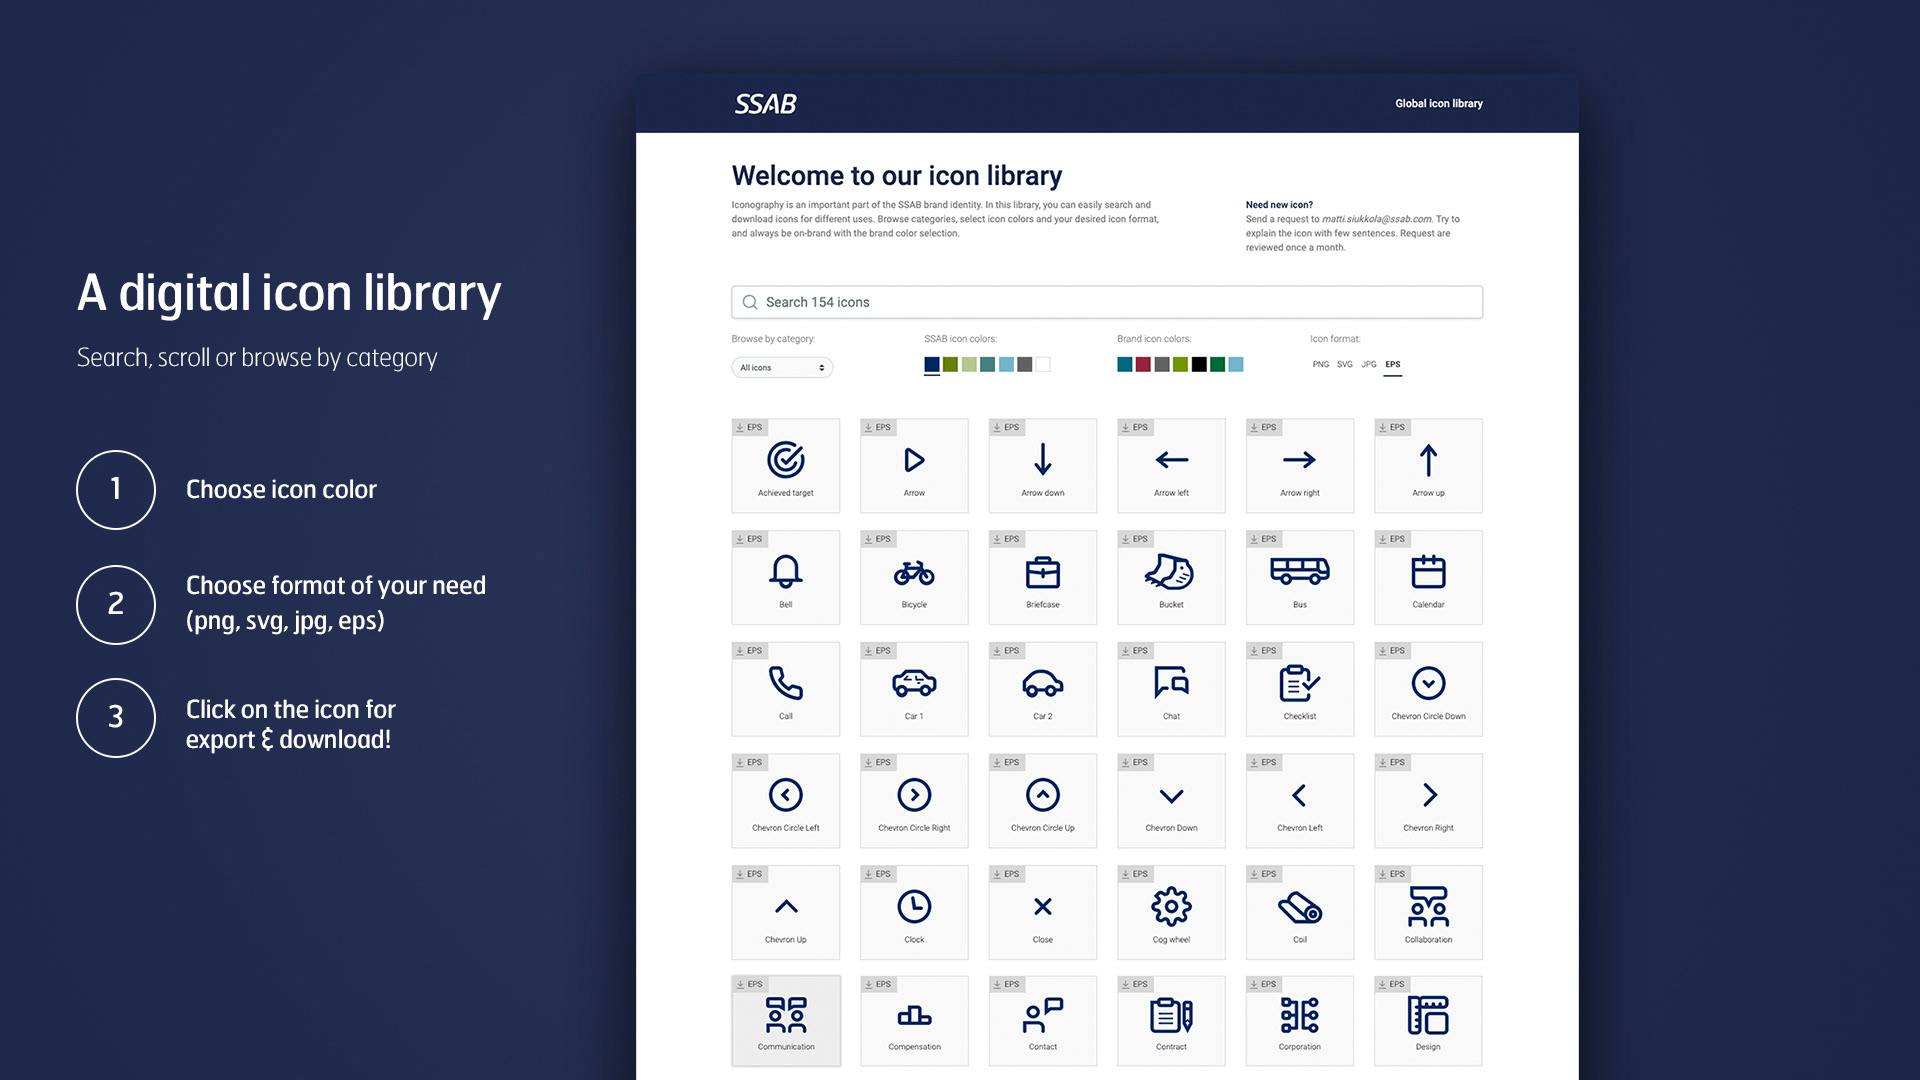 SSAB's new icon library developed by Consid Communication